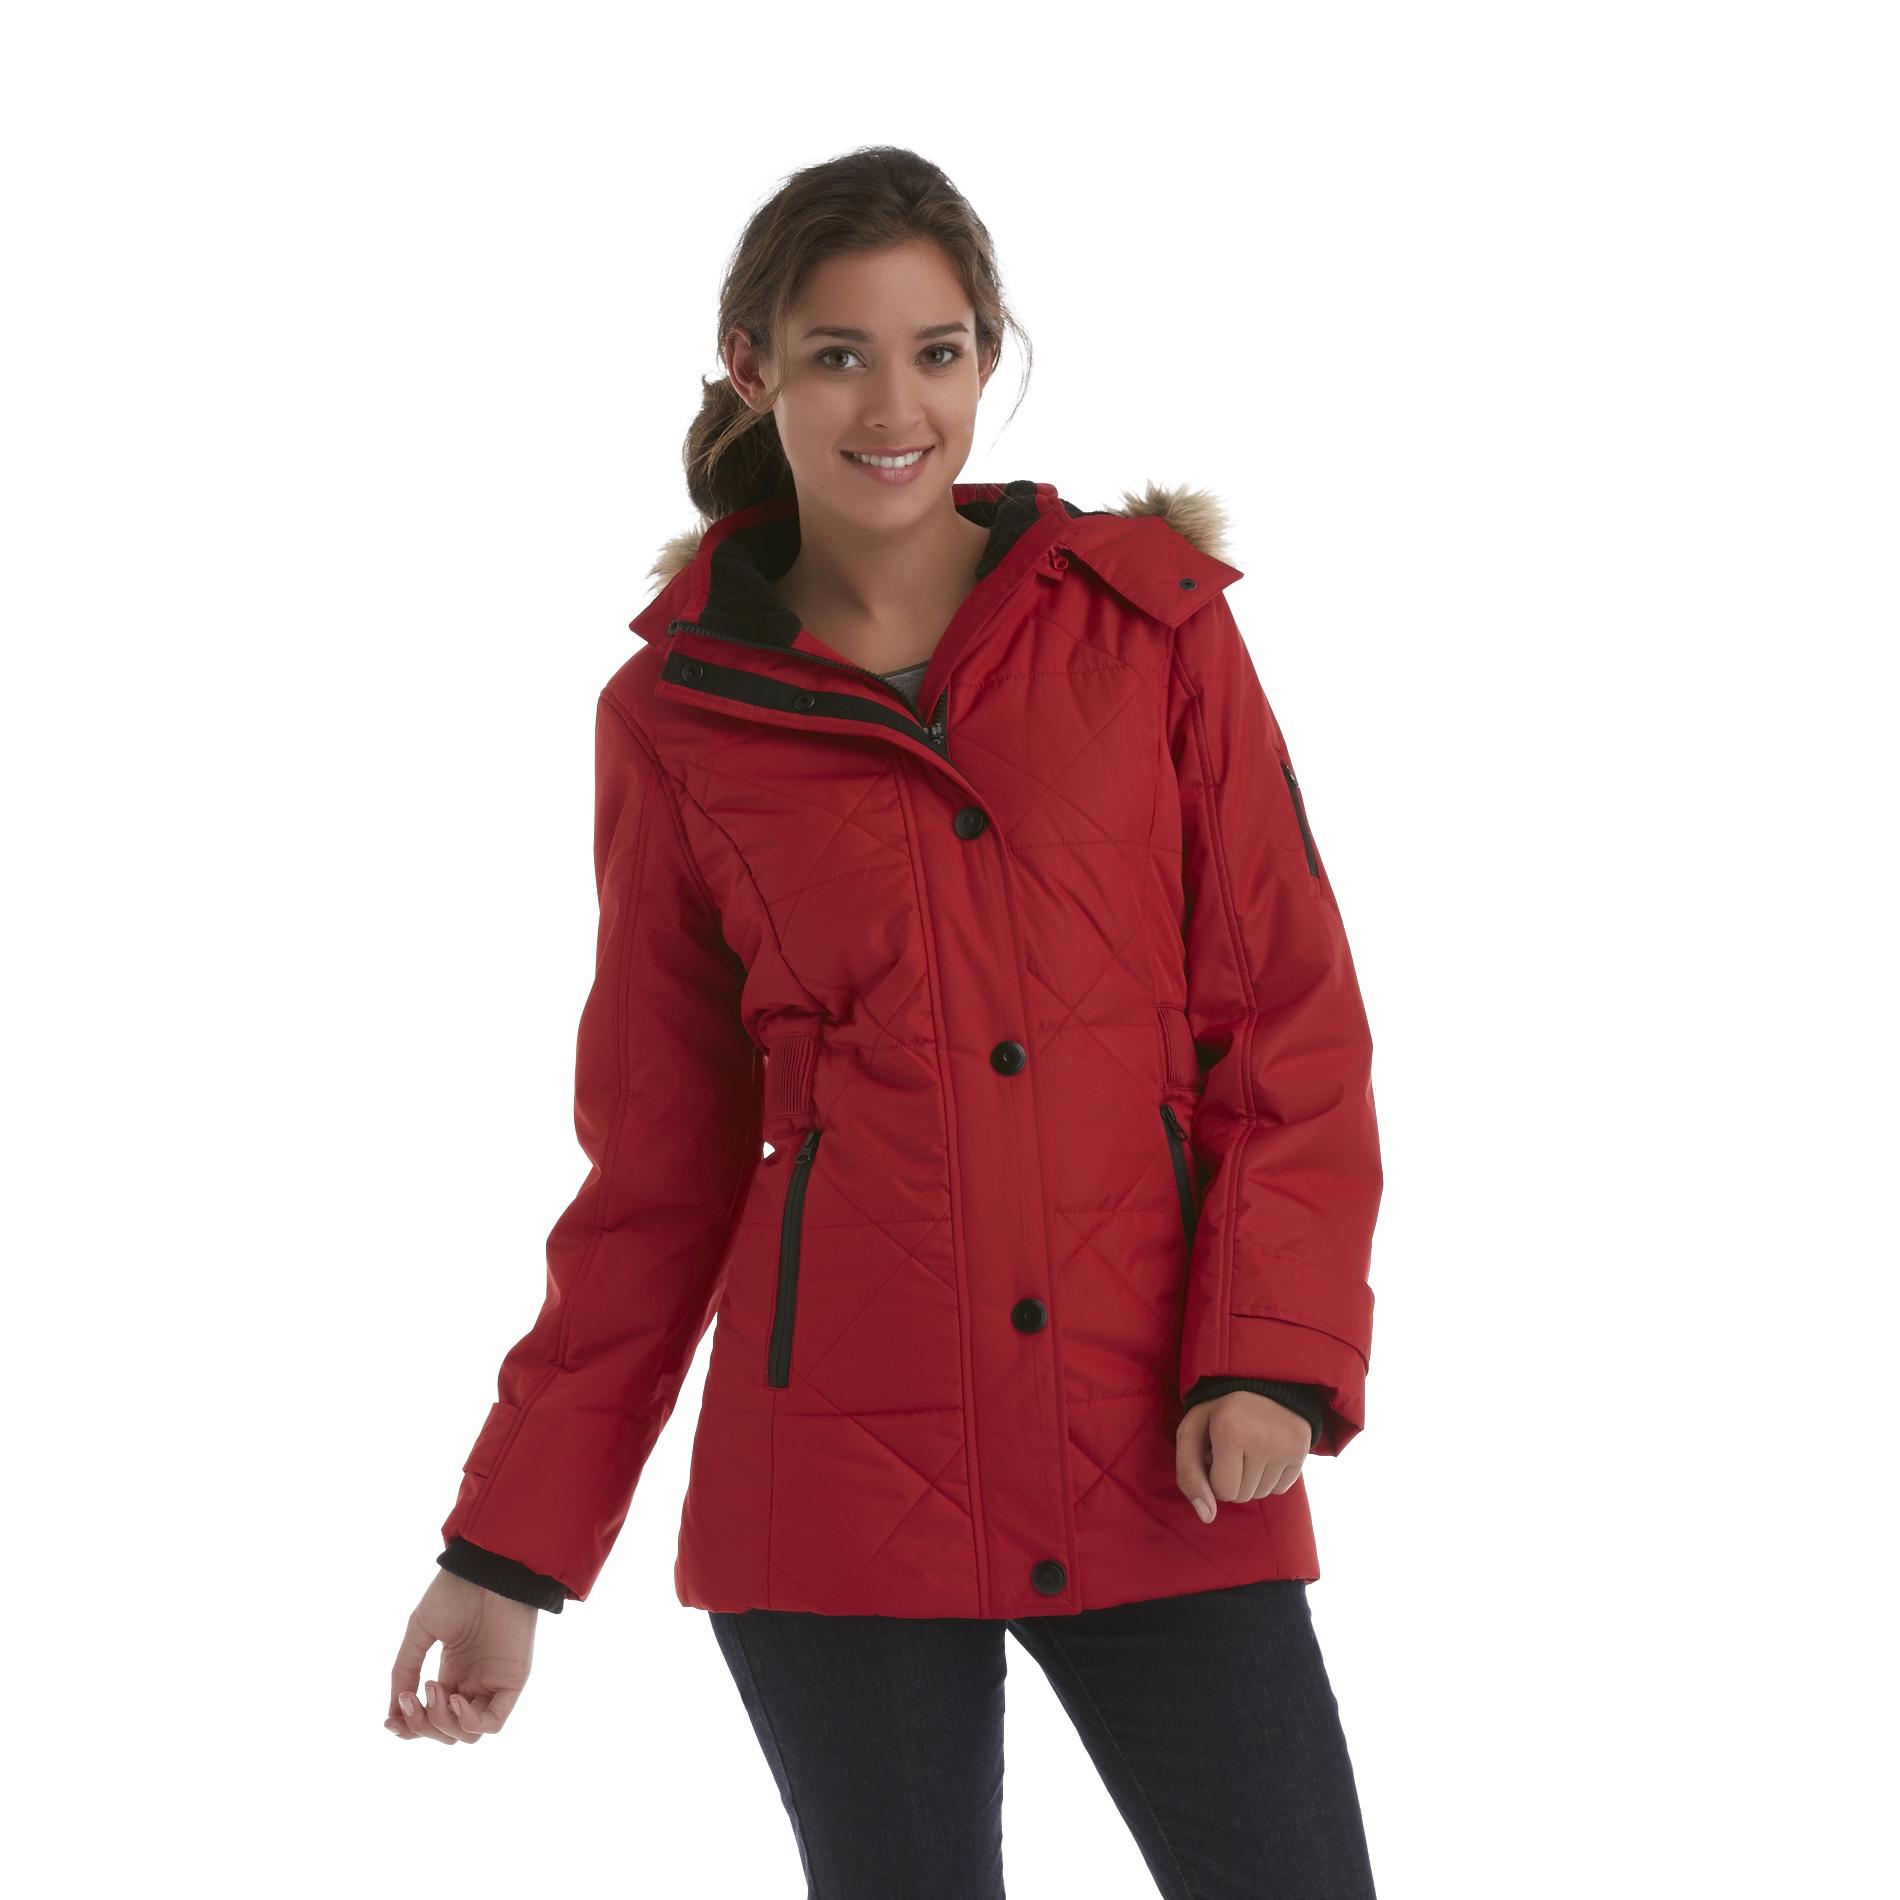 Athletech Women's Hooded Quilted Puffer Jacket